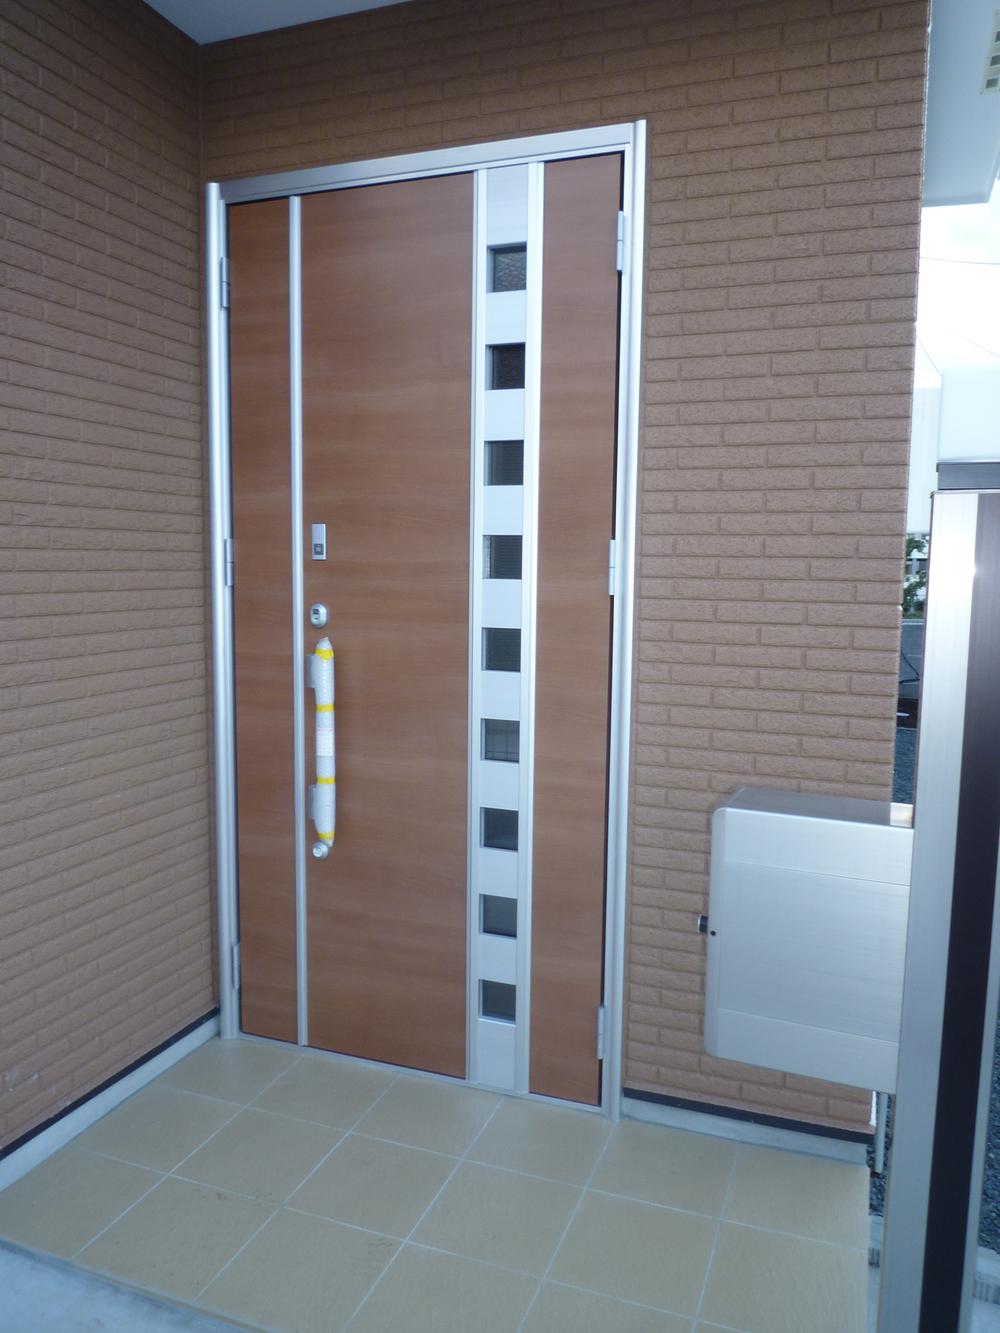 Entrance. Parent-child door with a card key